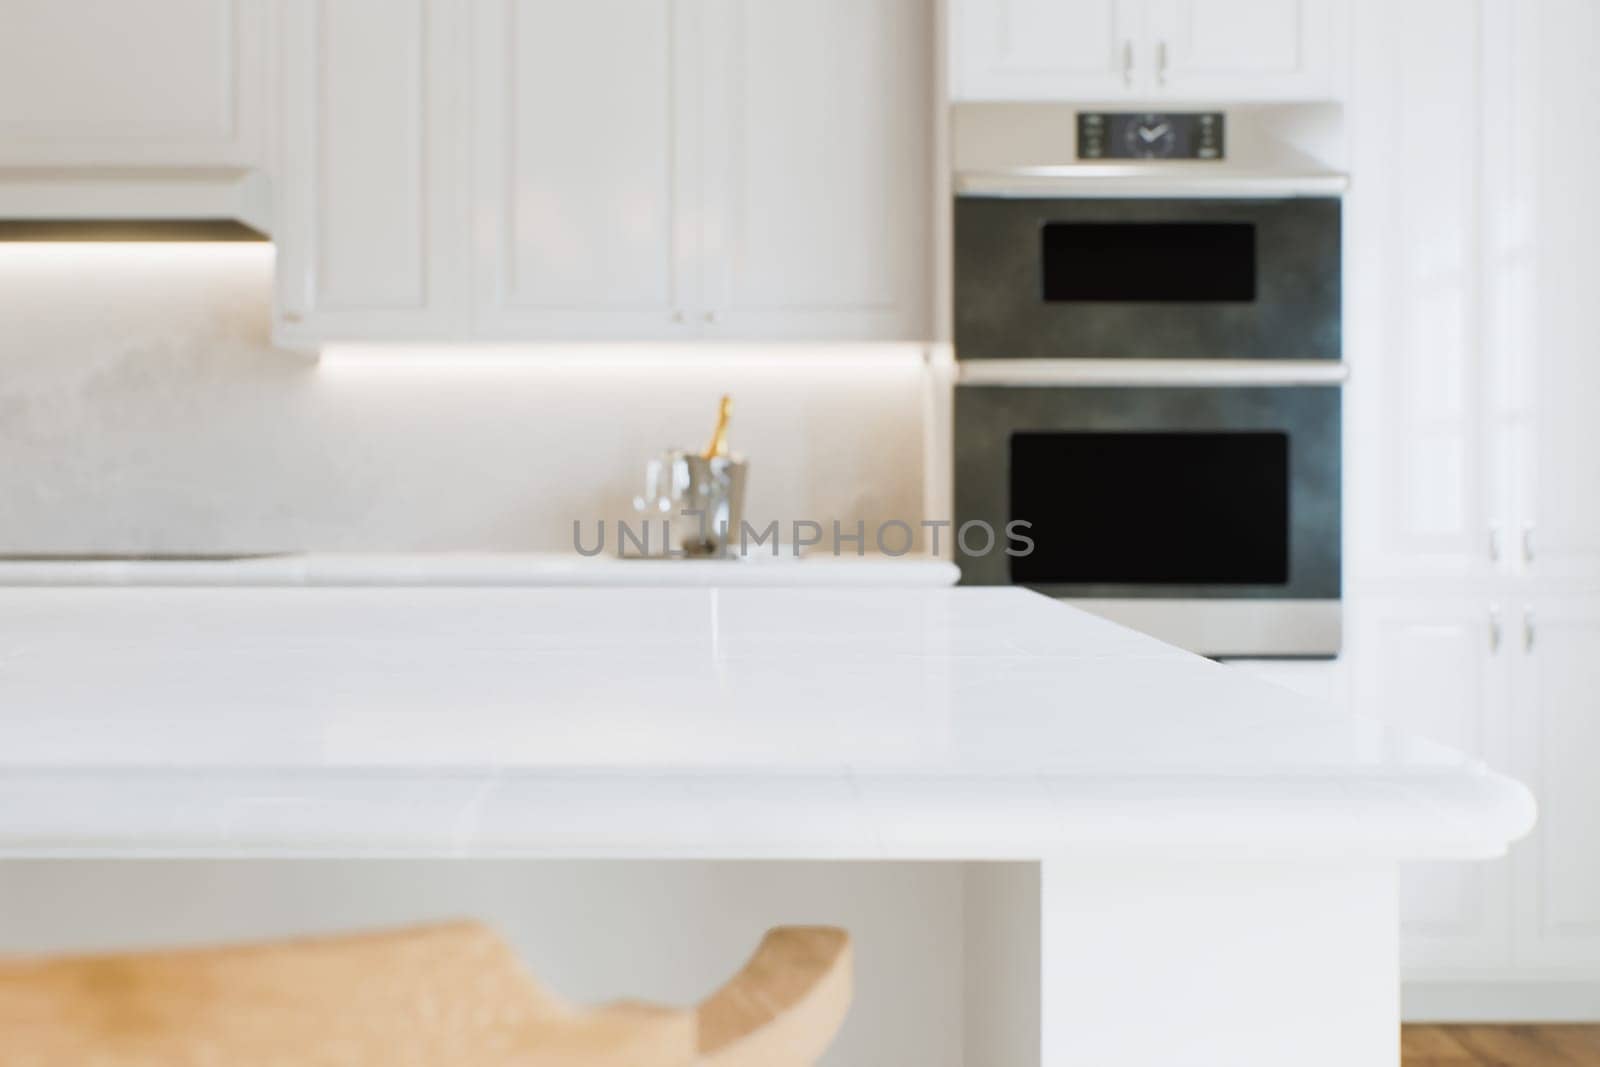 Kitchen white countertop with white marble, with blurred bokeh background. Presentation of goods in the kitchen interior on the countertop surface. 3D rendering